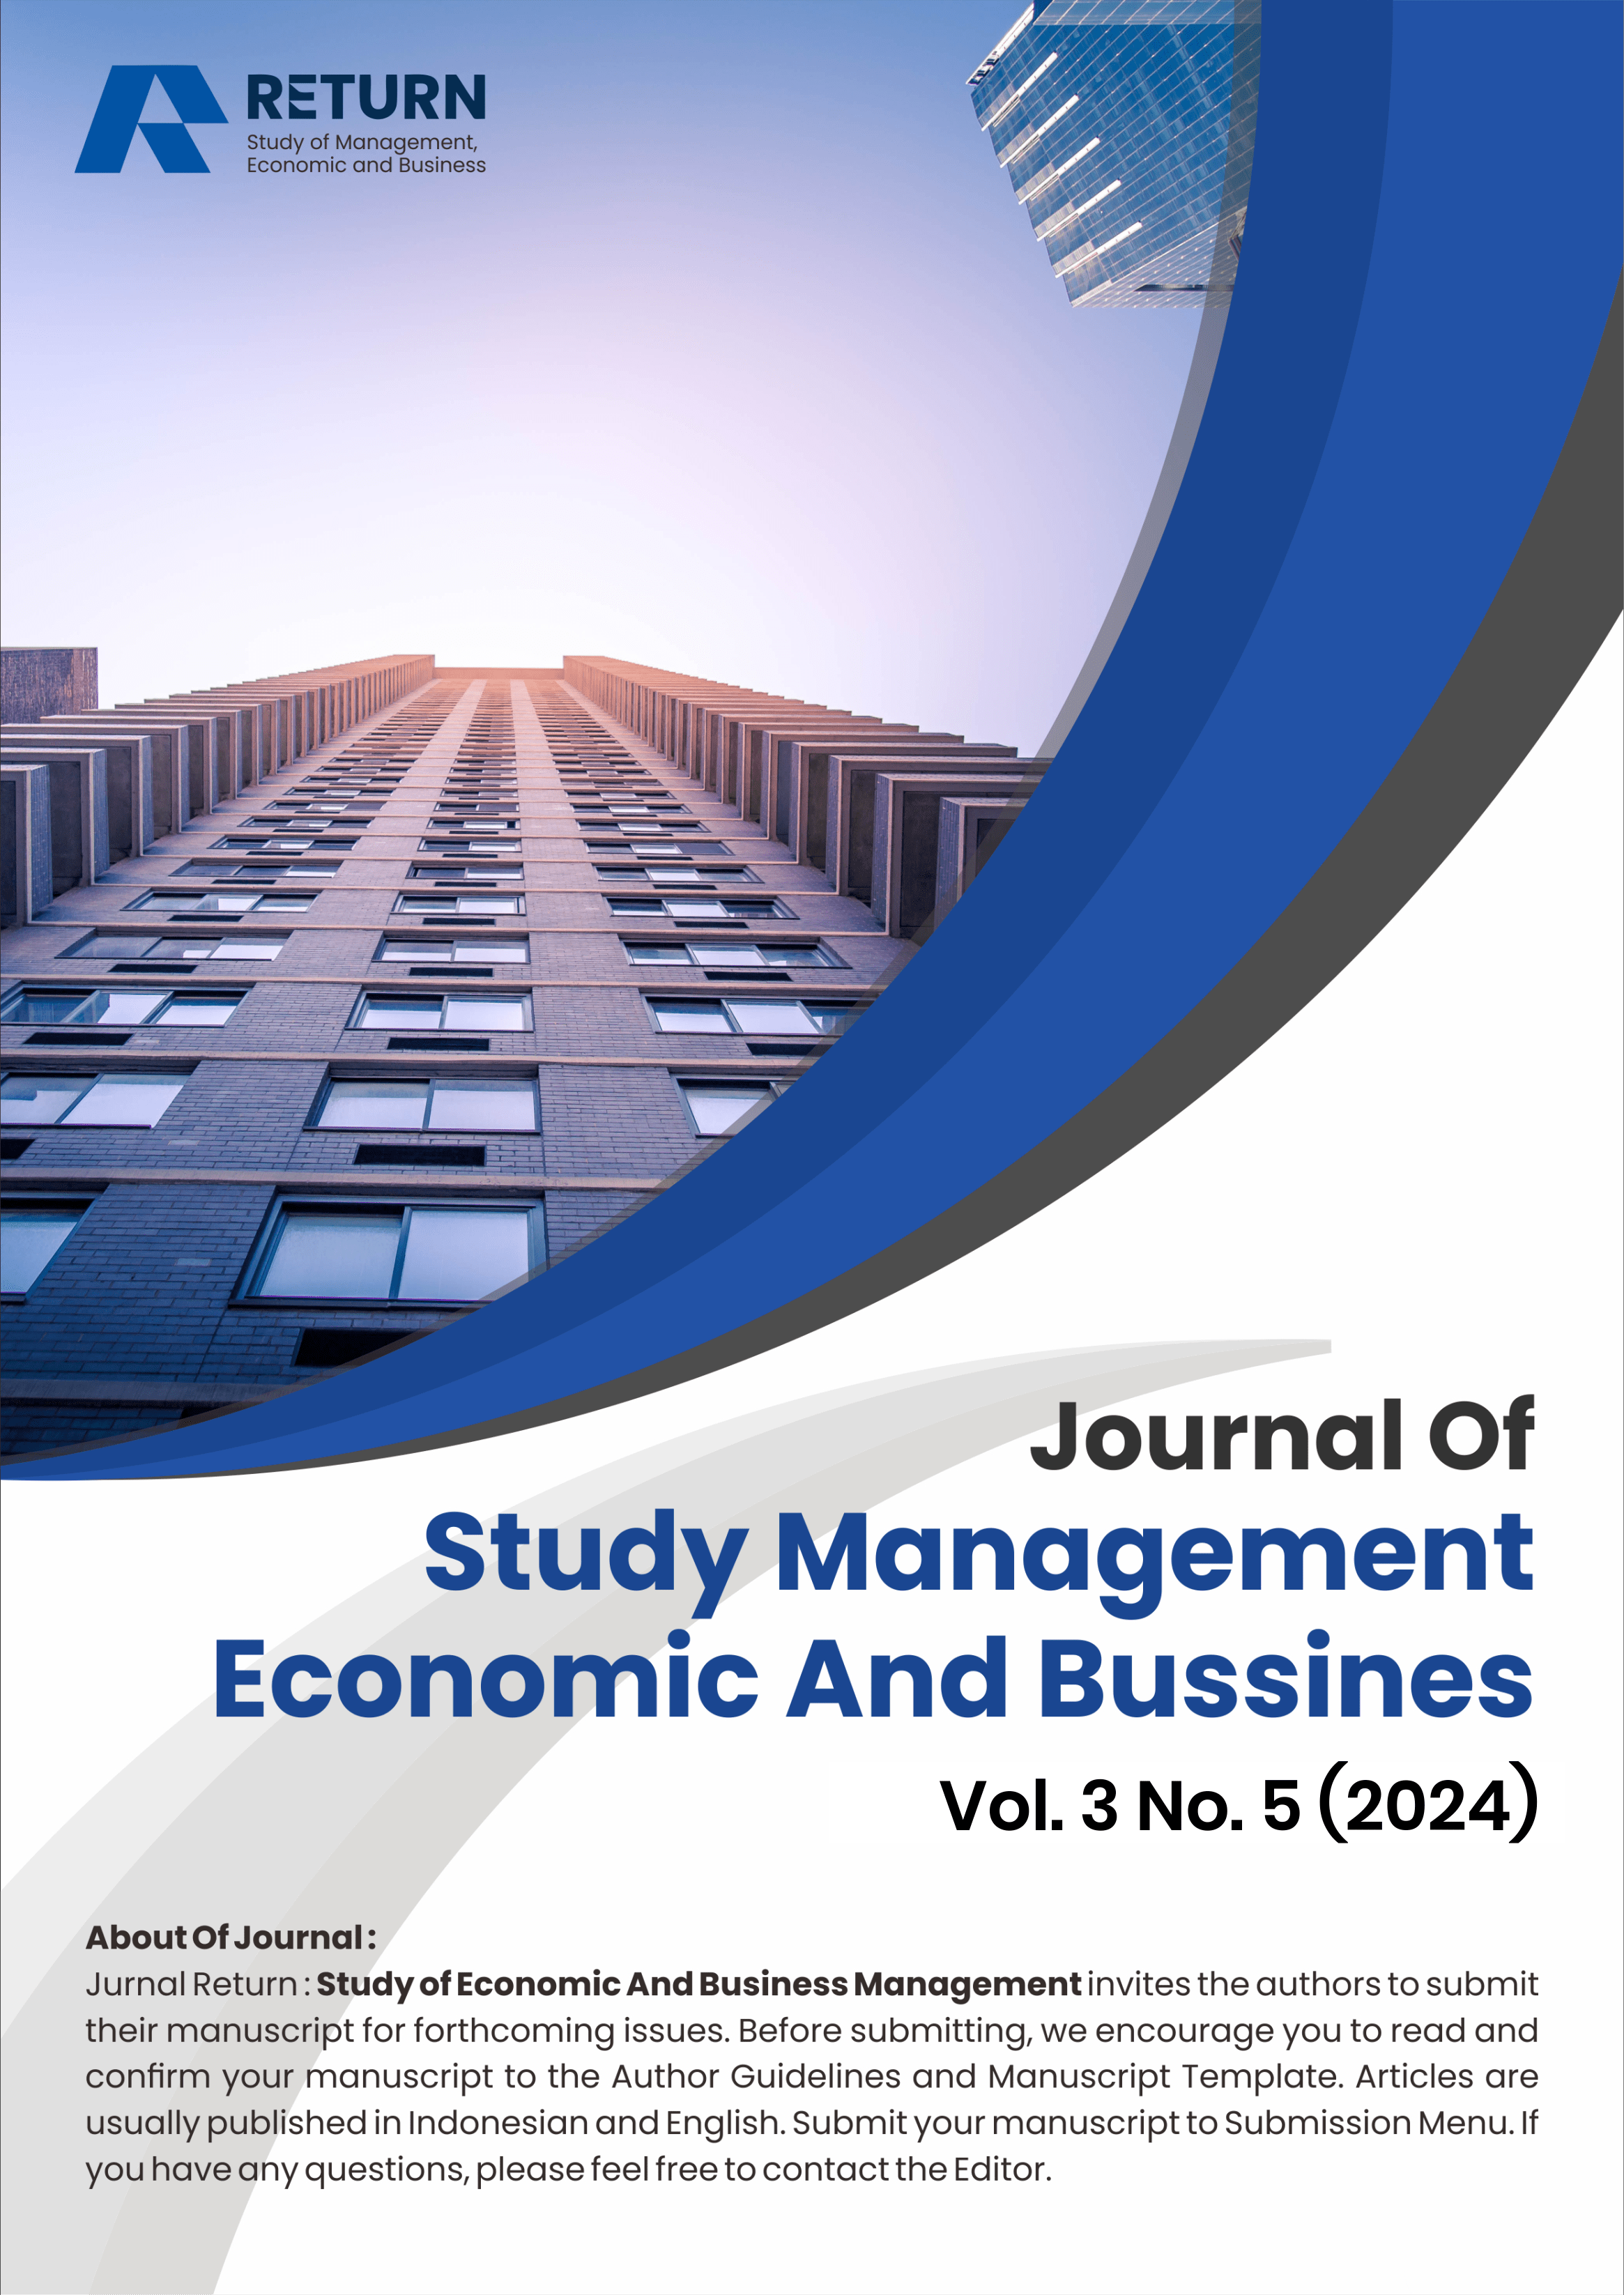 								View Vol. 3 No. 5 (2024): Return : Study of Management, Economic And Bussines
							